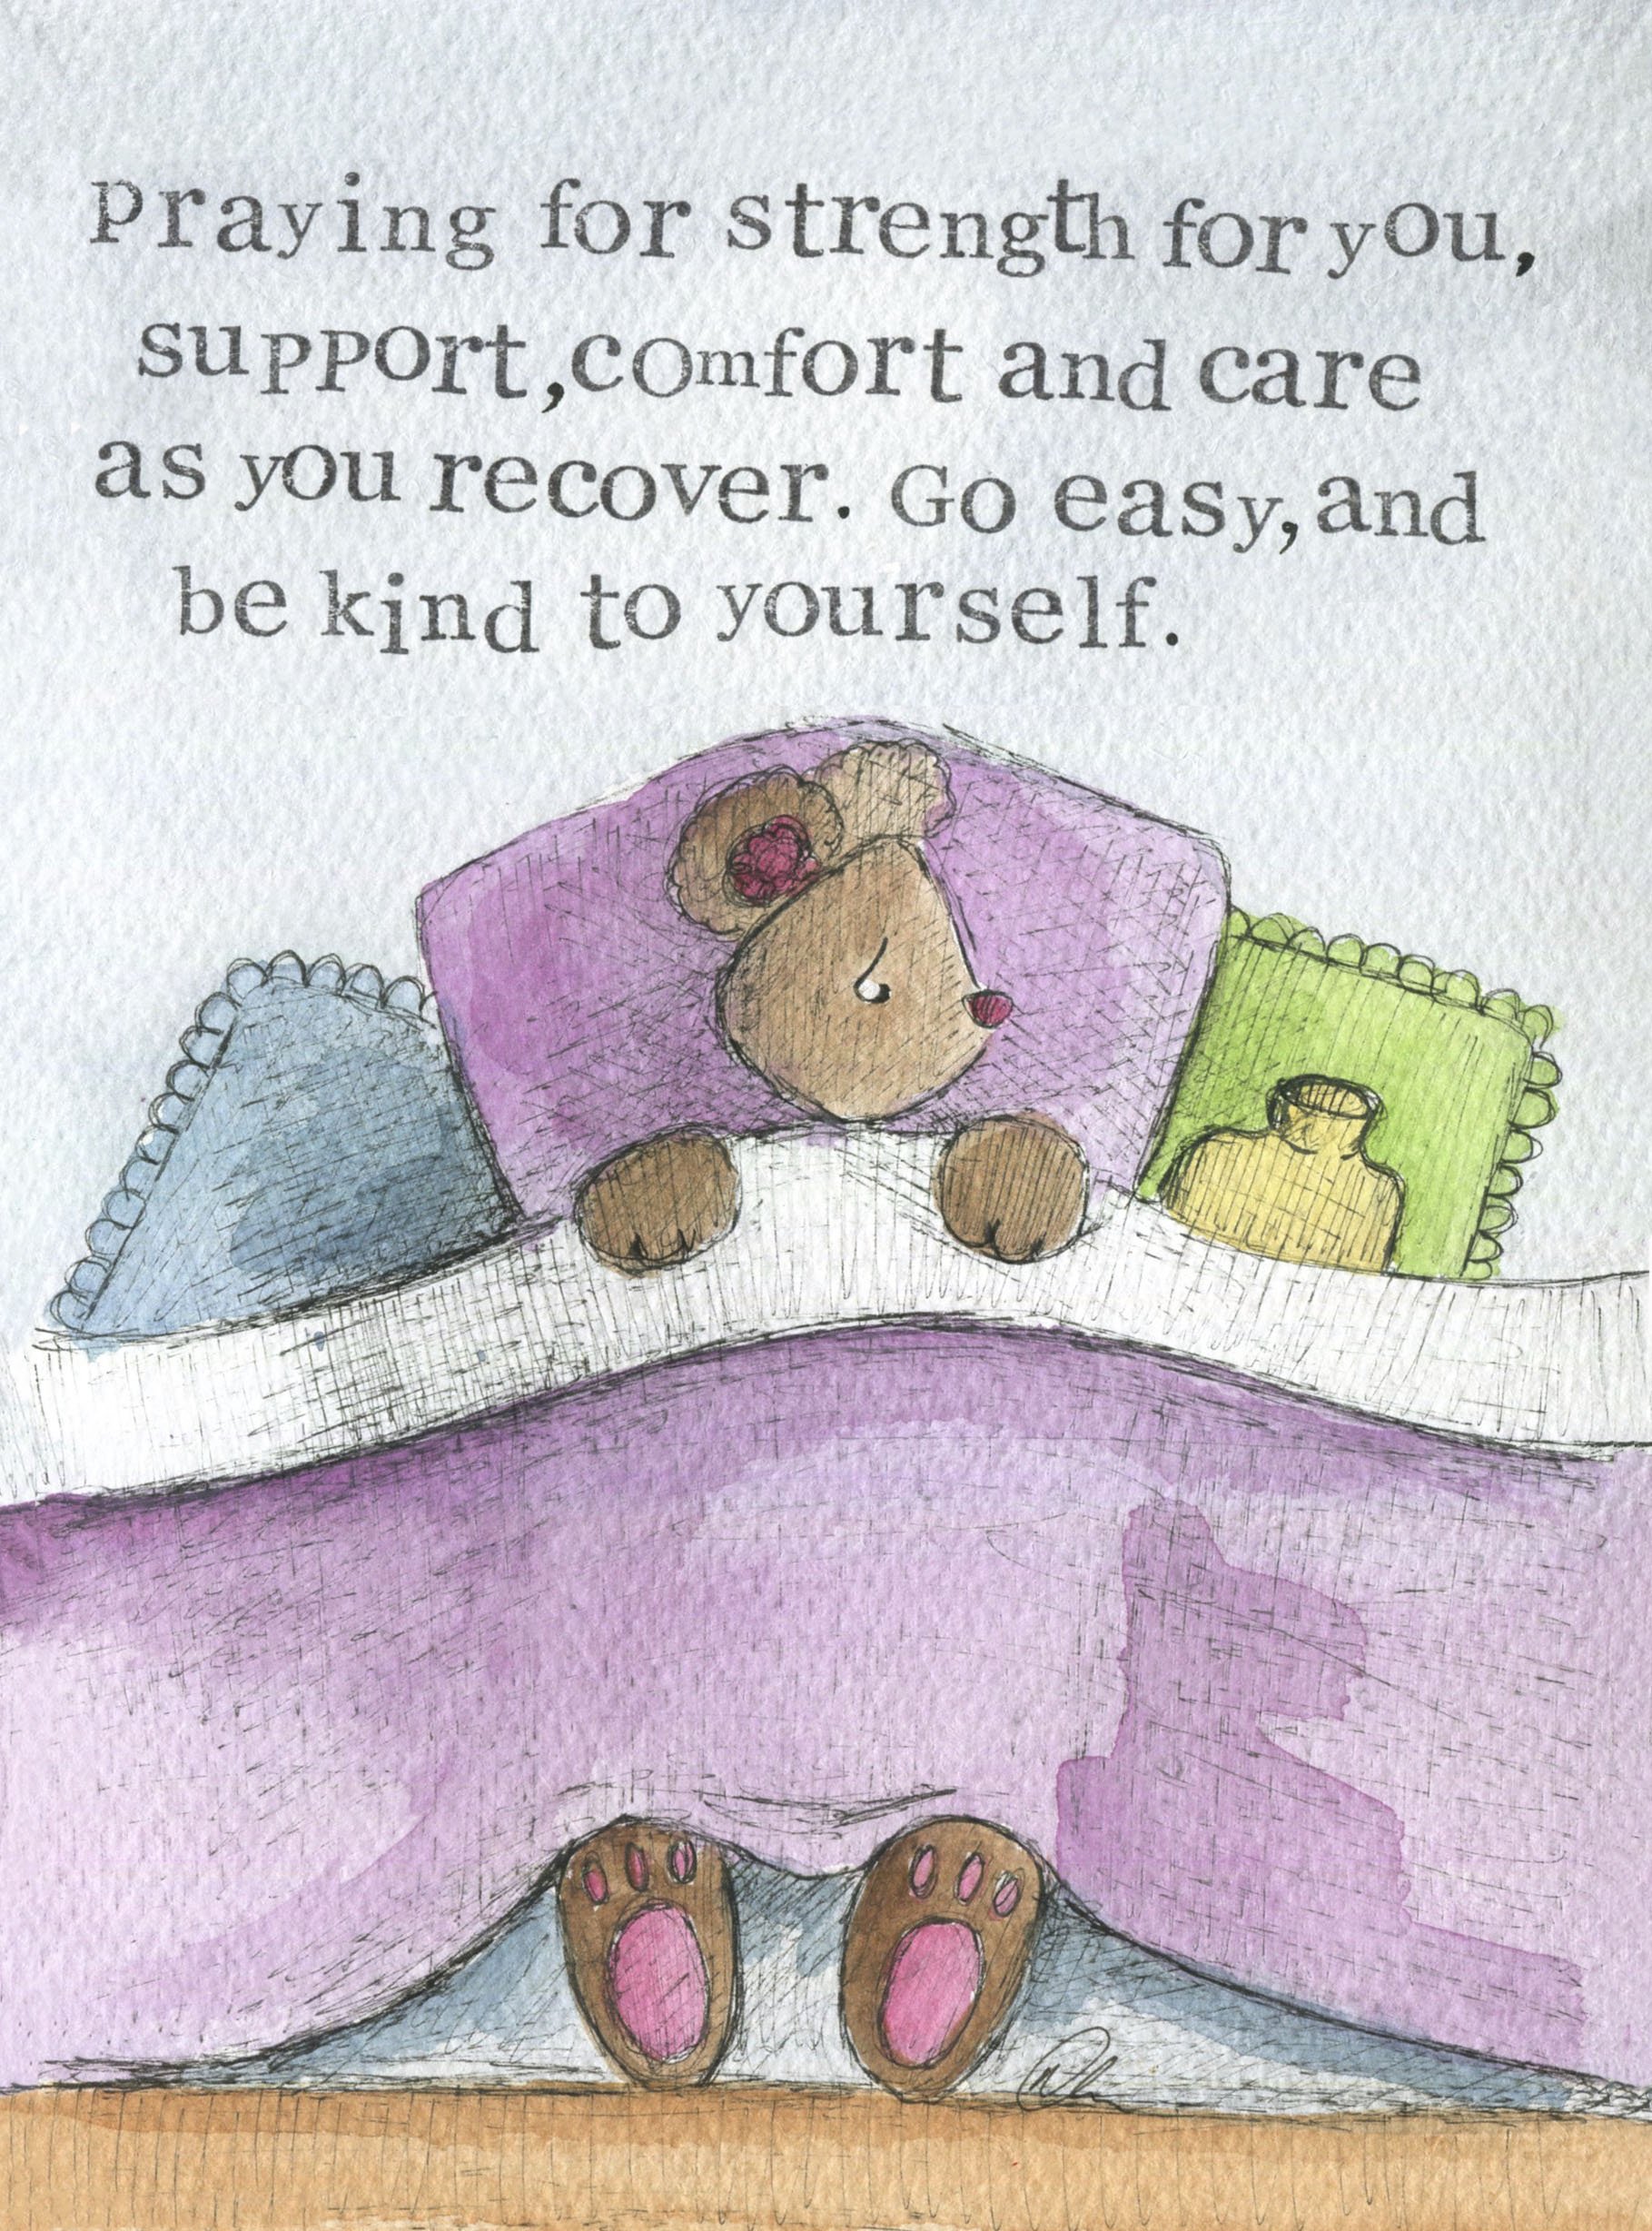 Comfort and care